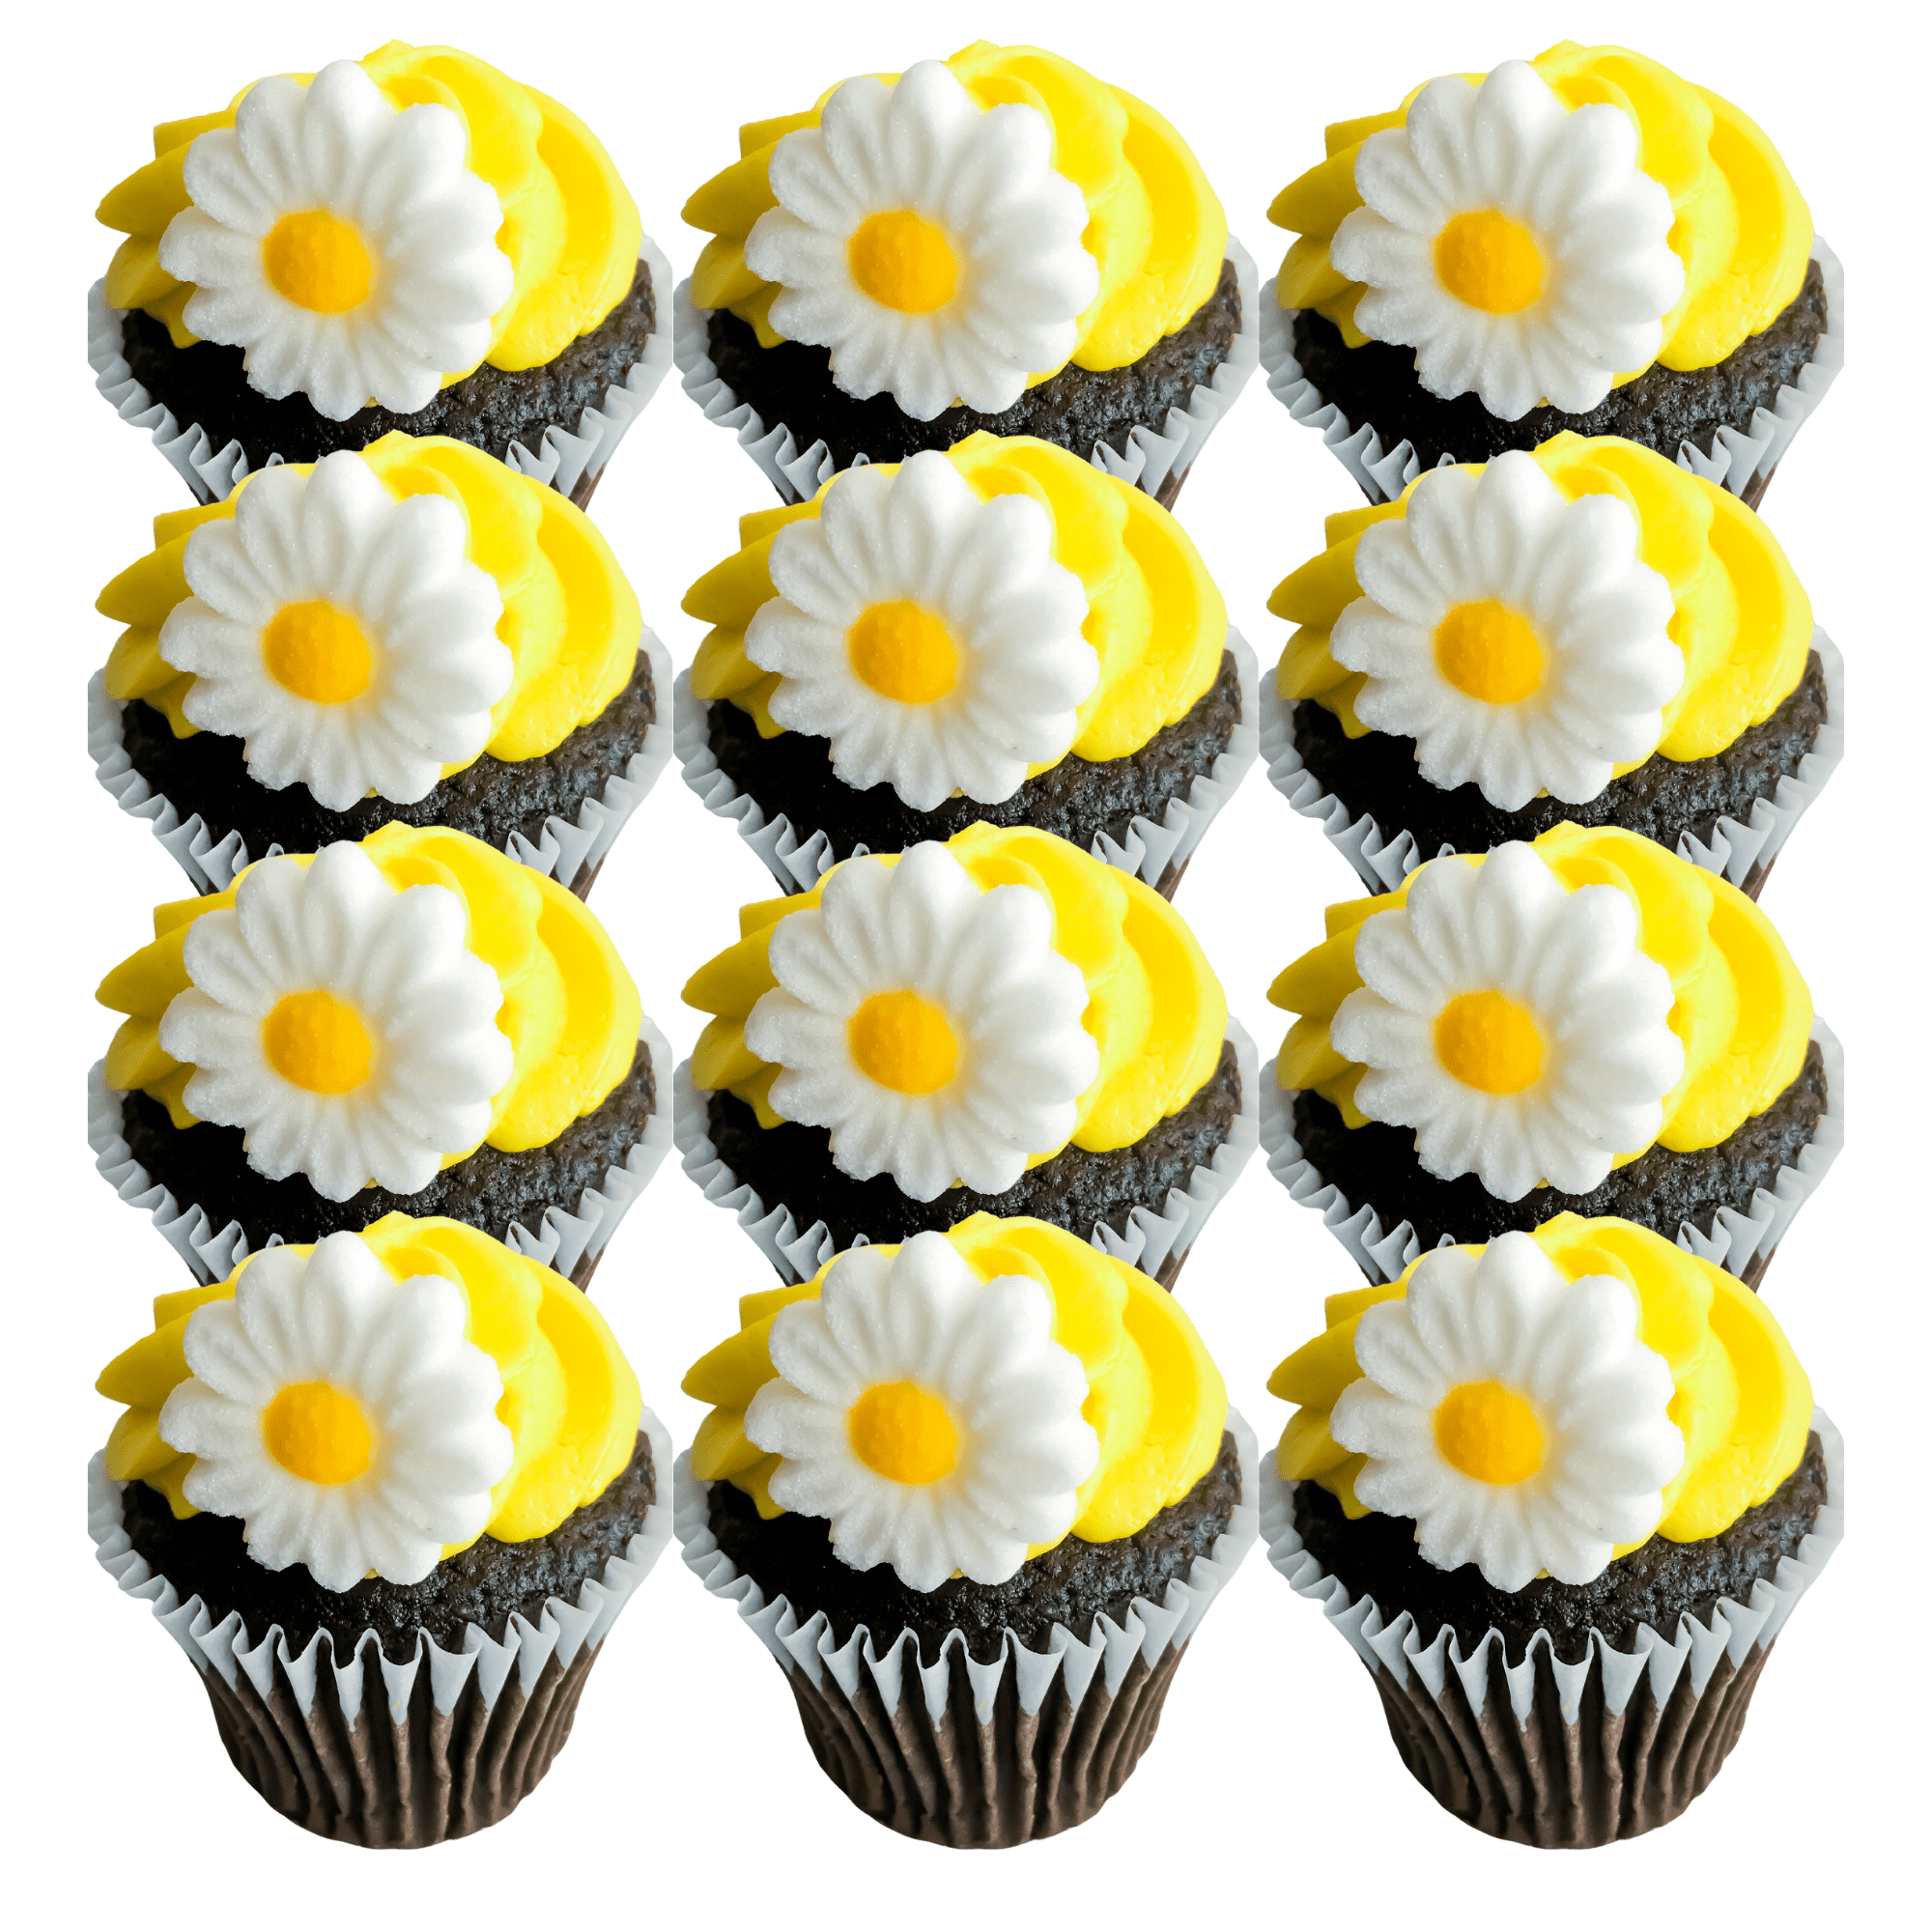 Sprinkle Deco White and Yellow Daisies Molded Sugar Cake/Cupcake ...